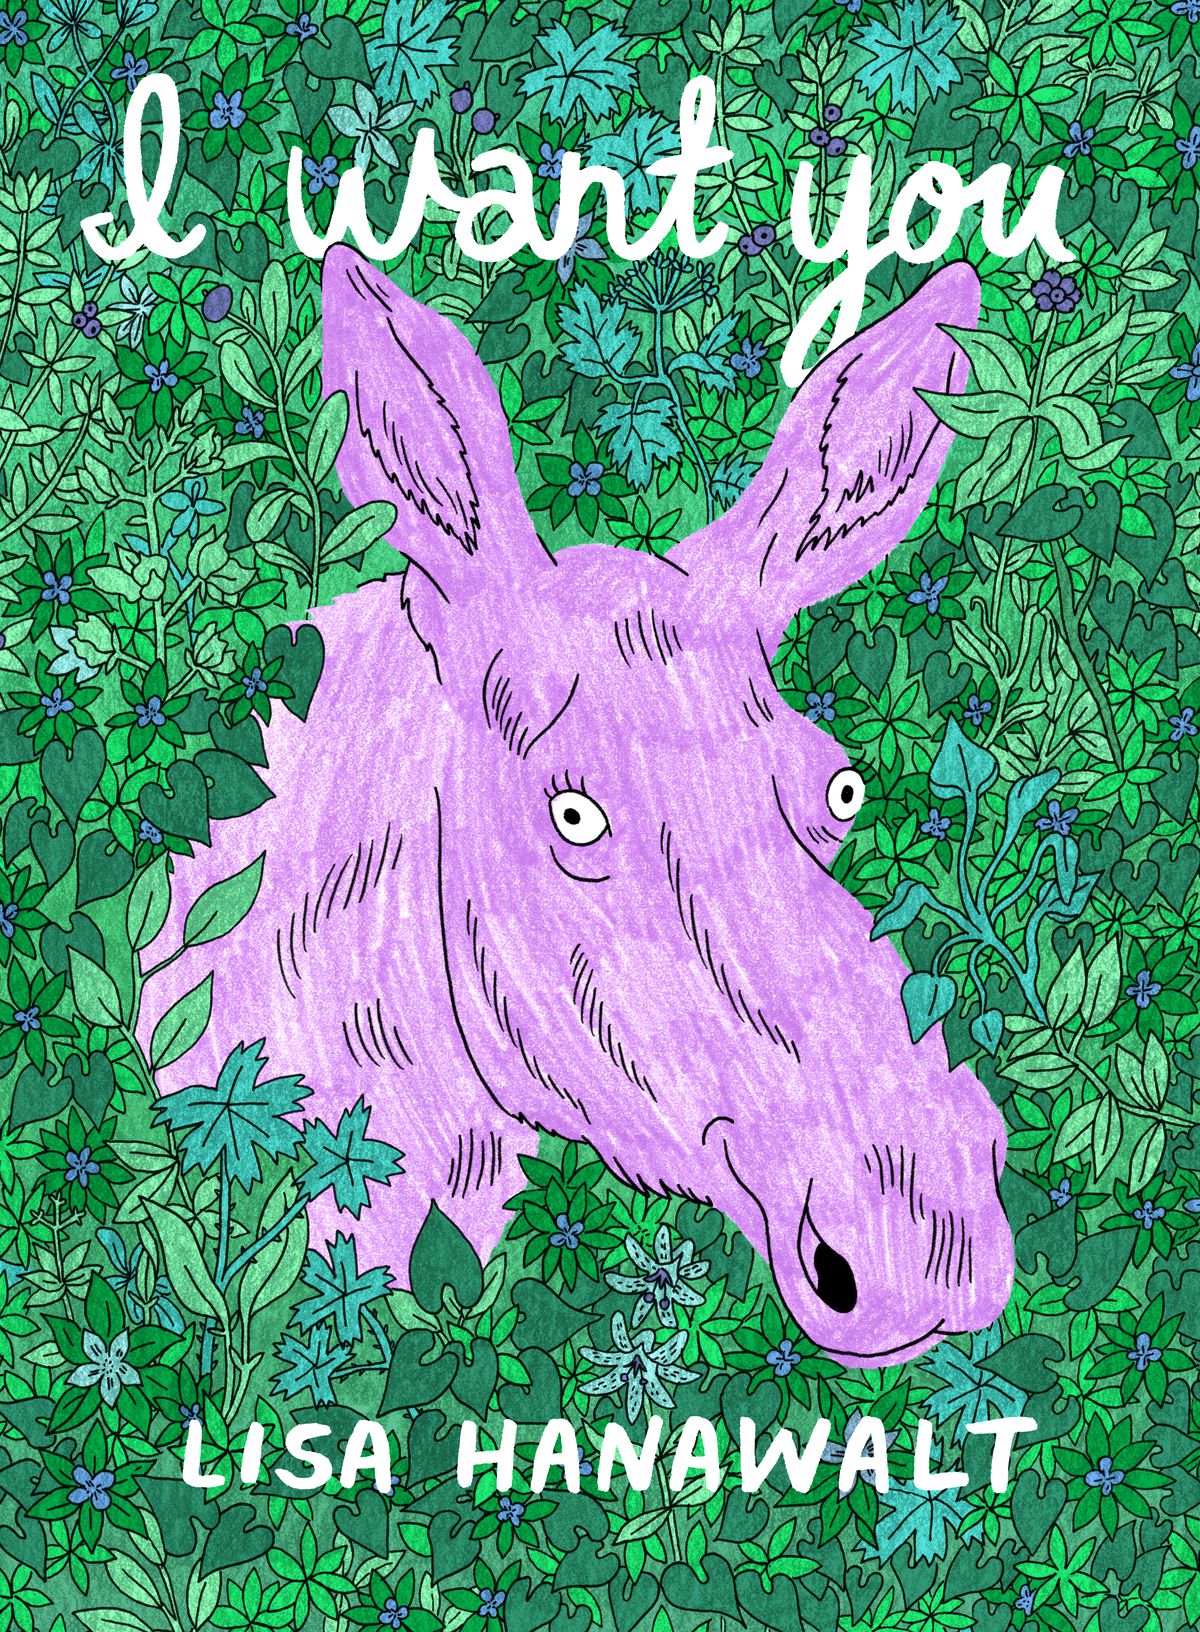 The cover of I Want You by Lisa Hanawalt, showing a pink moosehead surrounded by greenery.